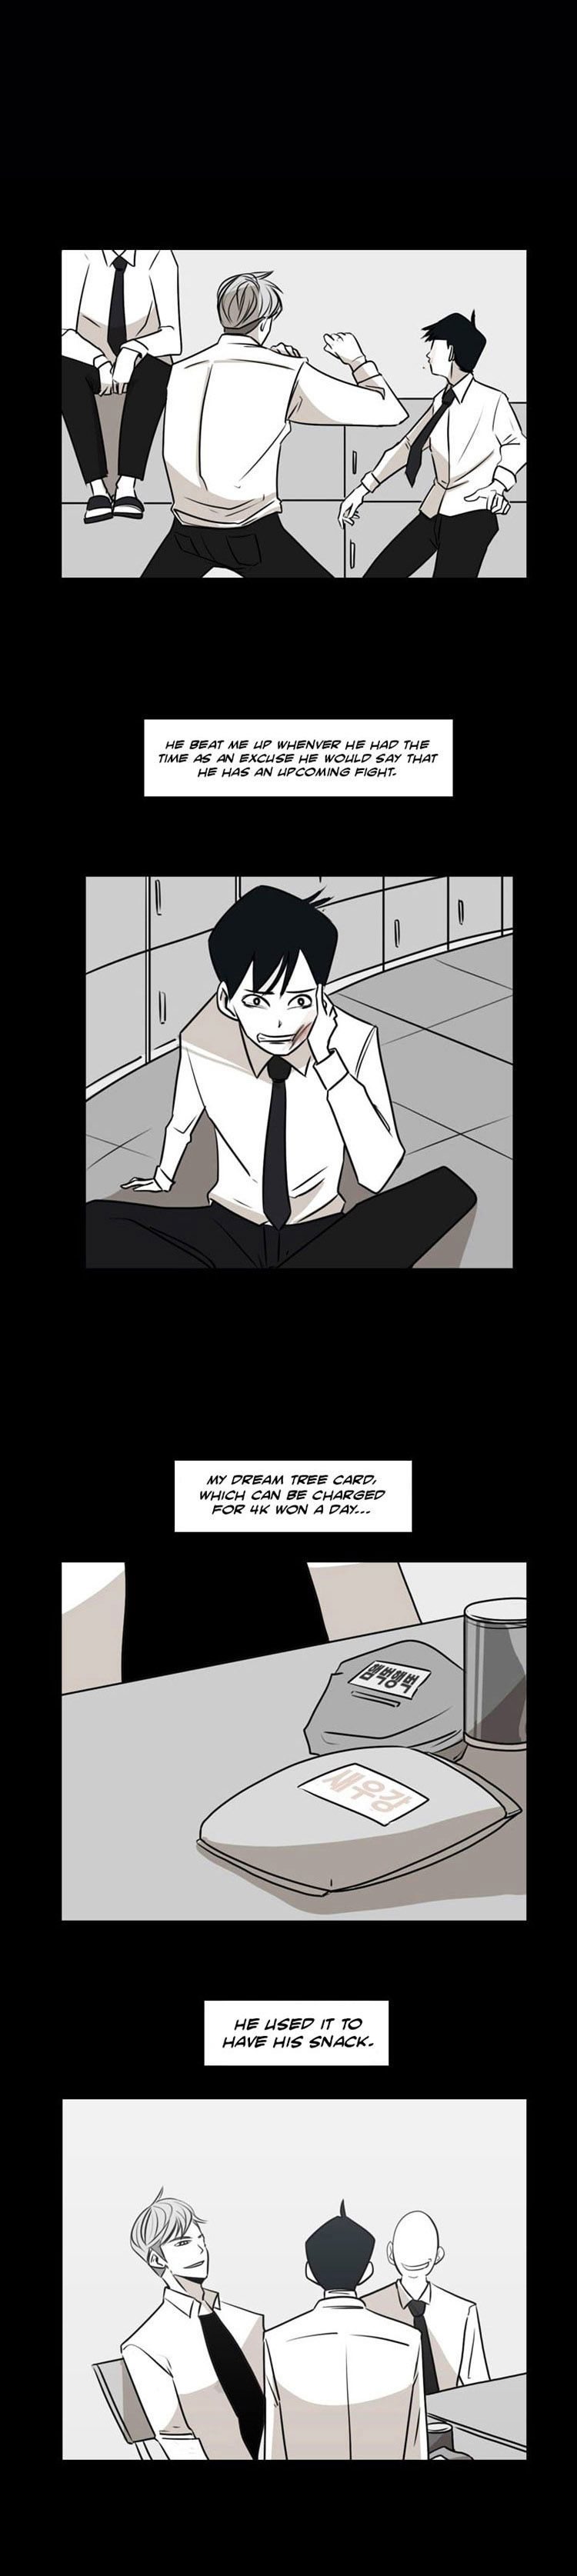 Shark Chapter 2 page 8